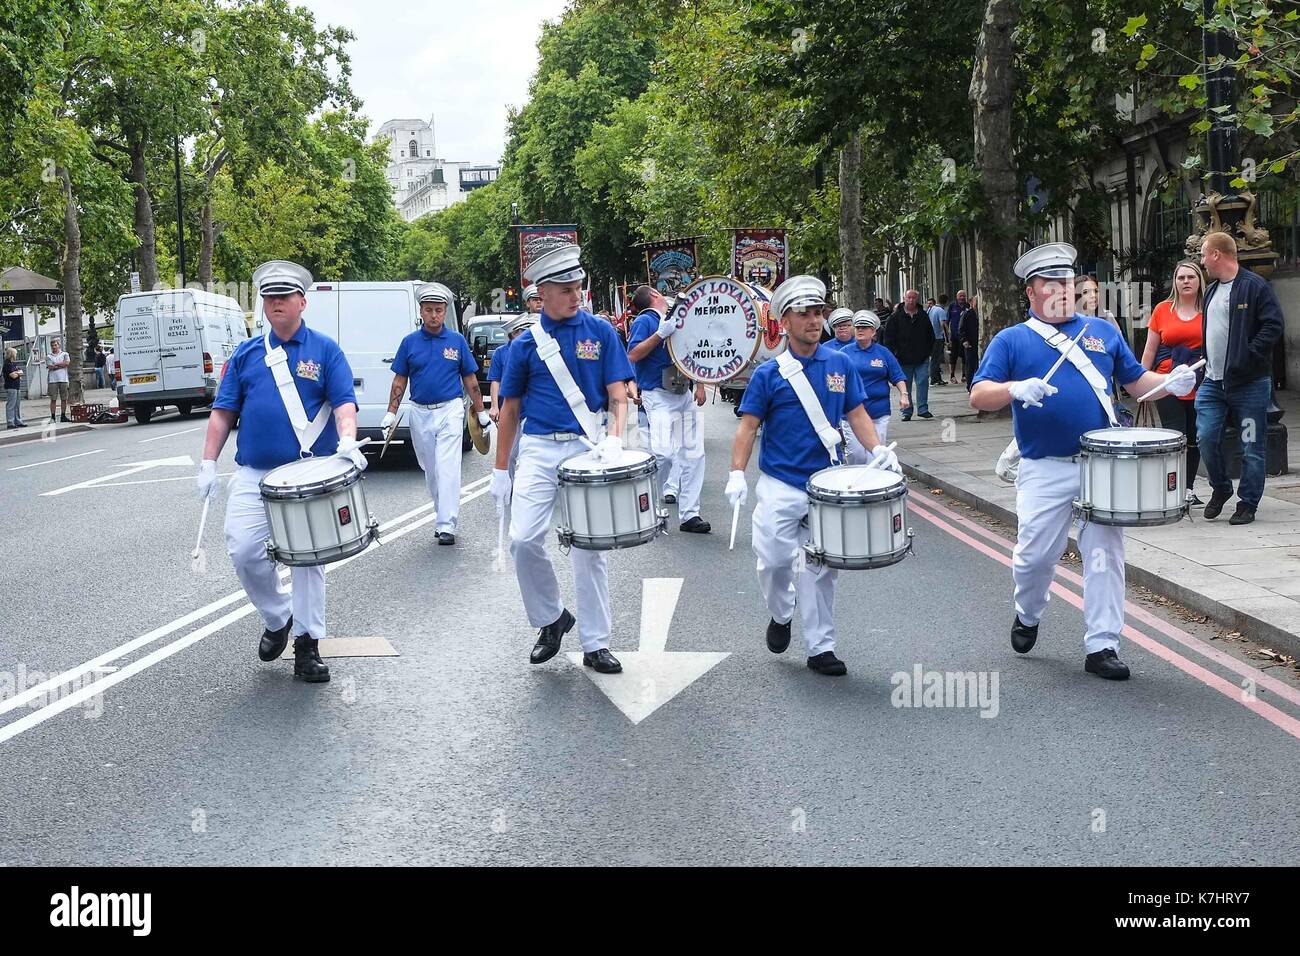 London, UK. 16th Sep, 2017. Apprentice boys of Derry march through London to remember Ulstermen who fought in the Great war. Lord Carson led Ulster Protestants against Home Rule in the early part of the 20th century.  Credit: claire doherty/Alamy Live News Stock Photo